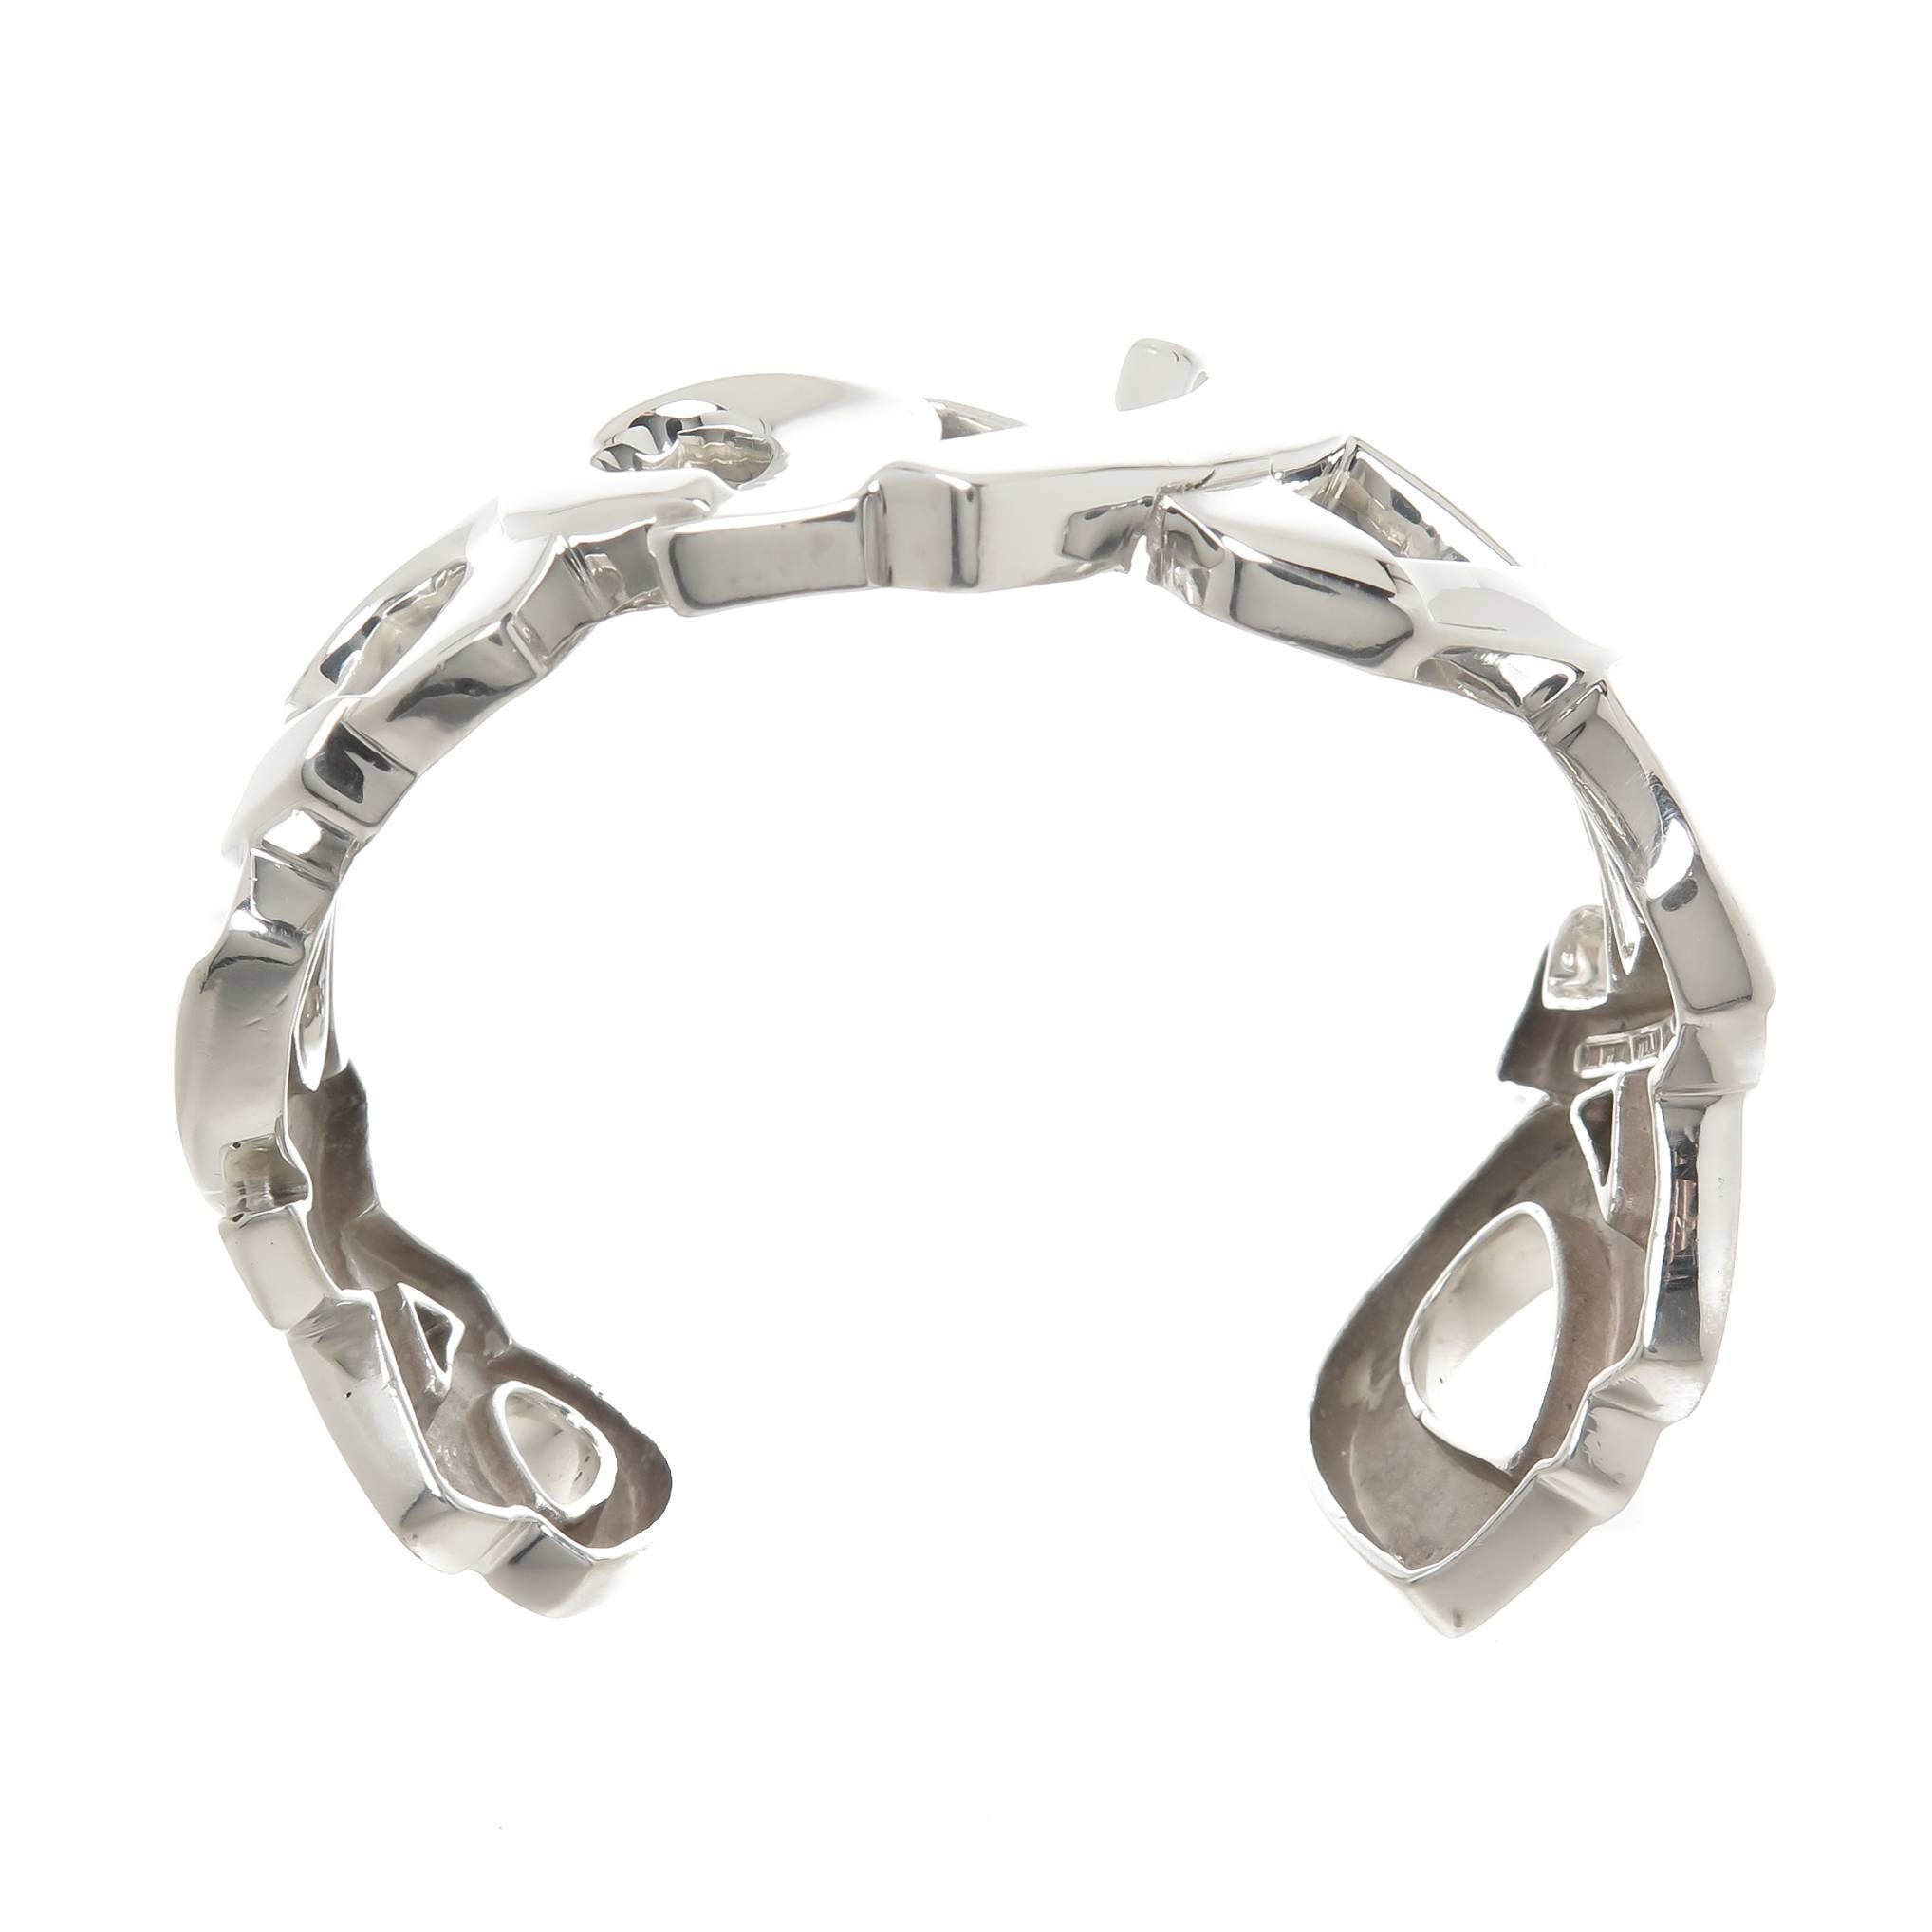 Circa 1980s Paloma Picasso for Tiffany & Company Sterling Silver XO Love and Kisses Bracelet, measuring 1 1/8 inch wide, inside measurement 6 1/4 inch with a 1 inch wide opening, the bracelet is pliable and can be bent open or closed just a bit